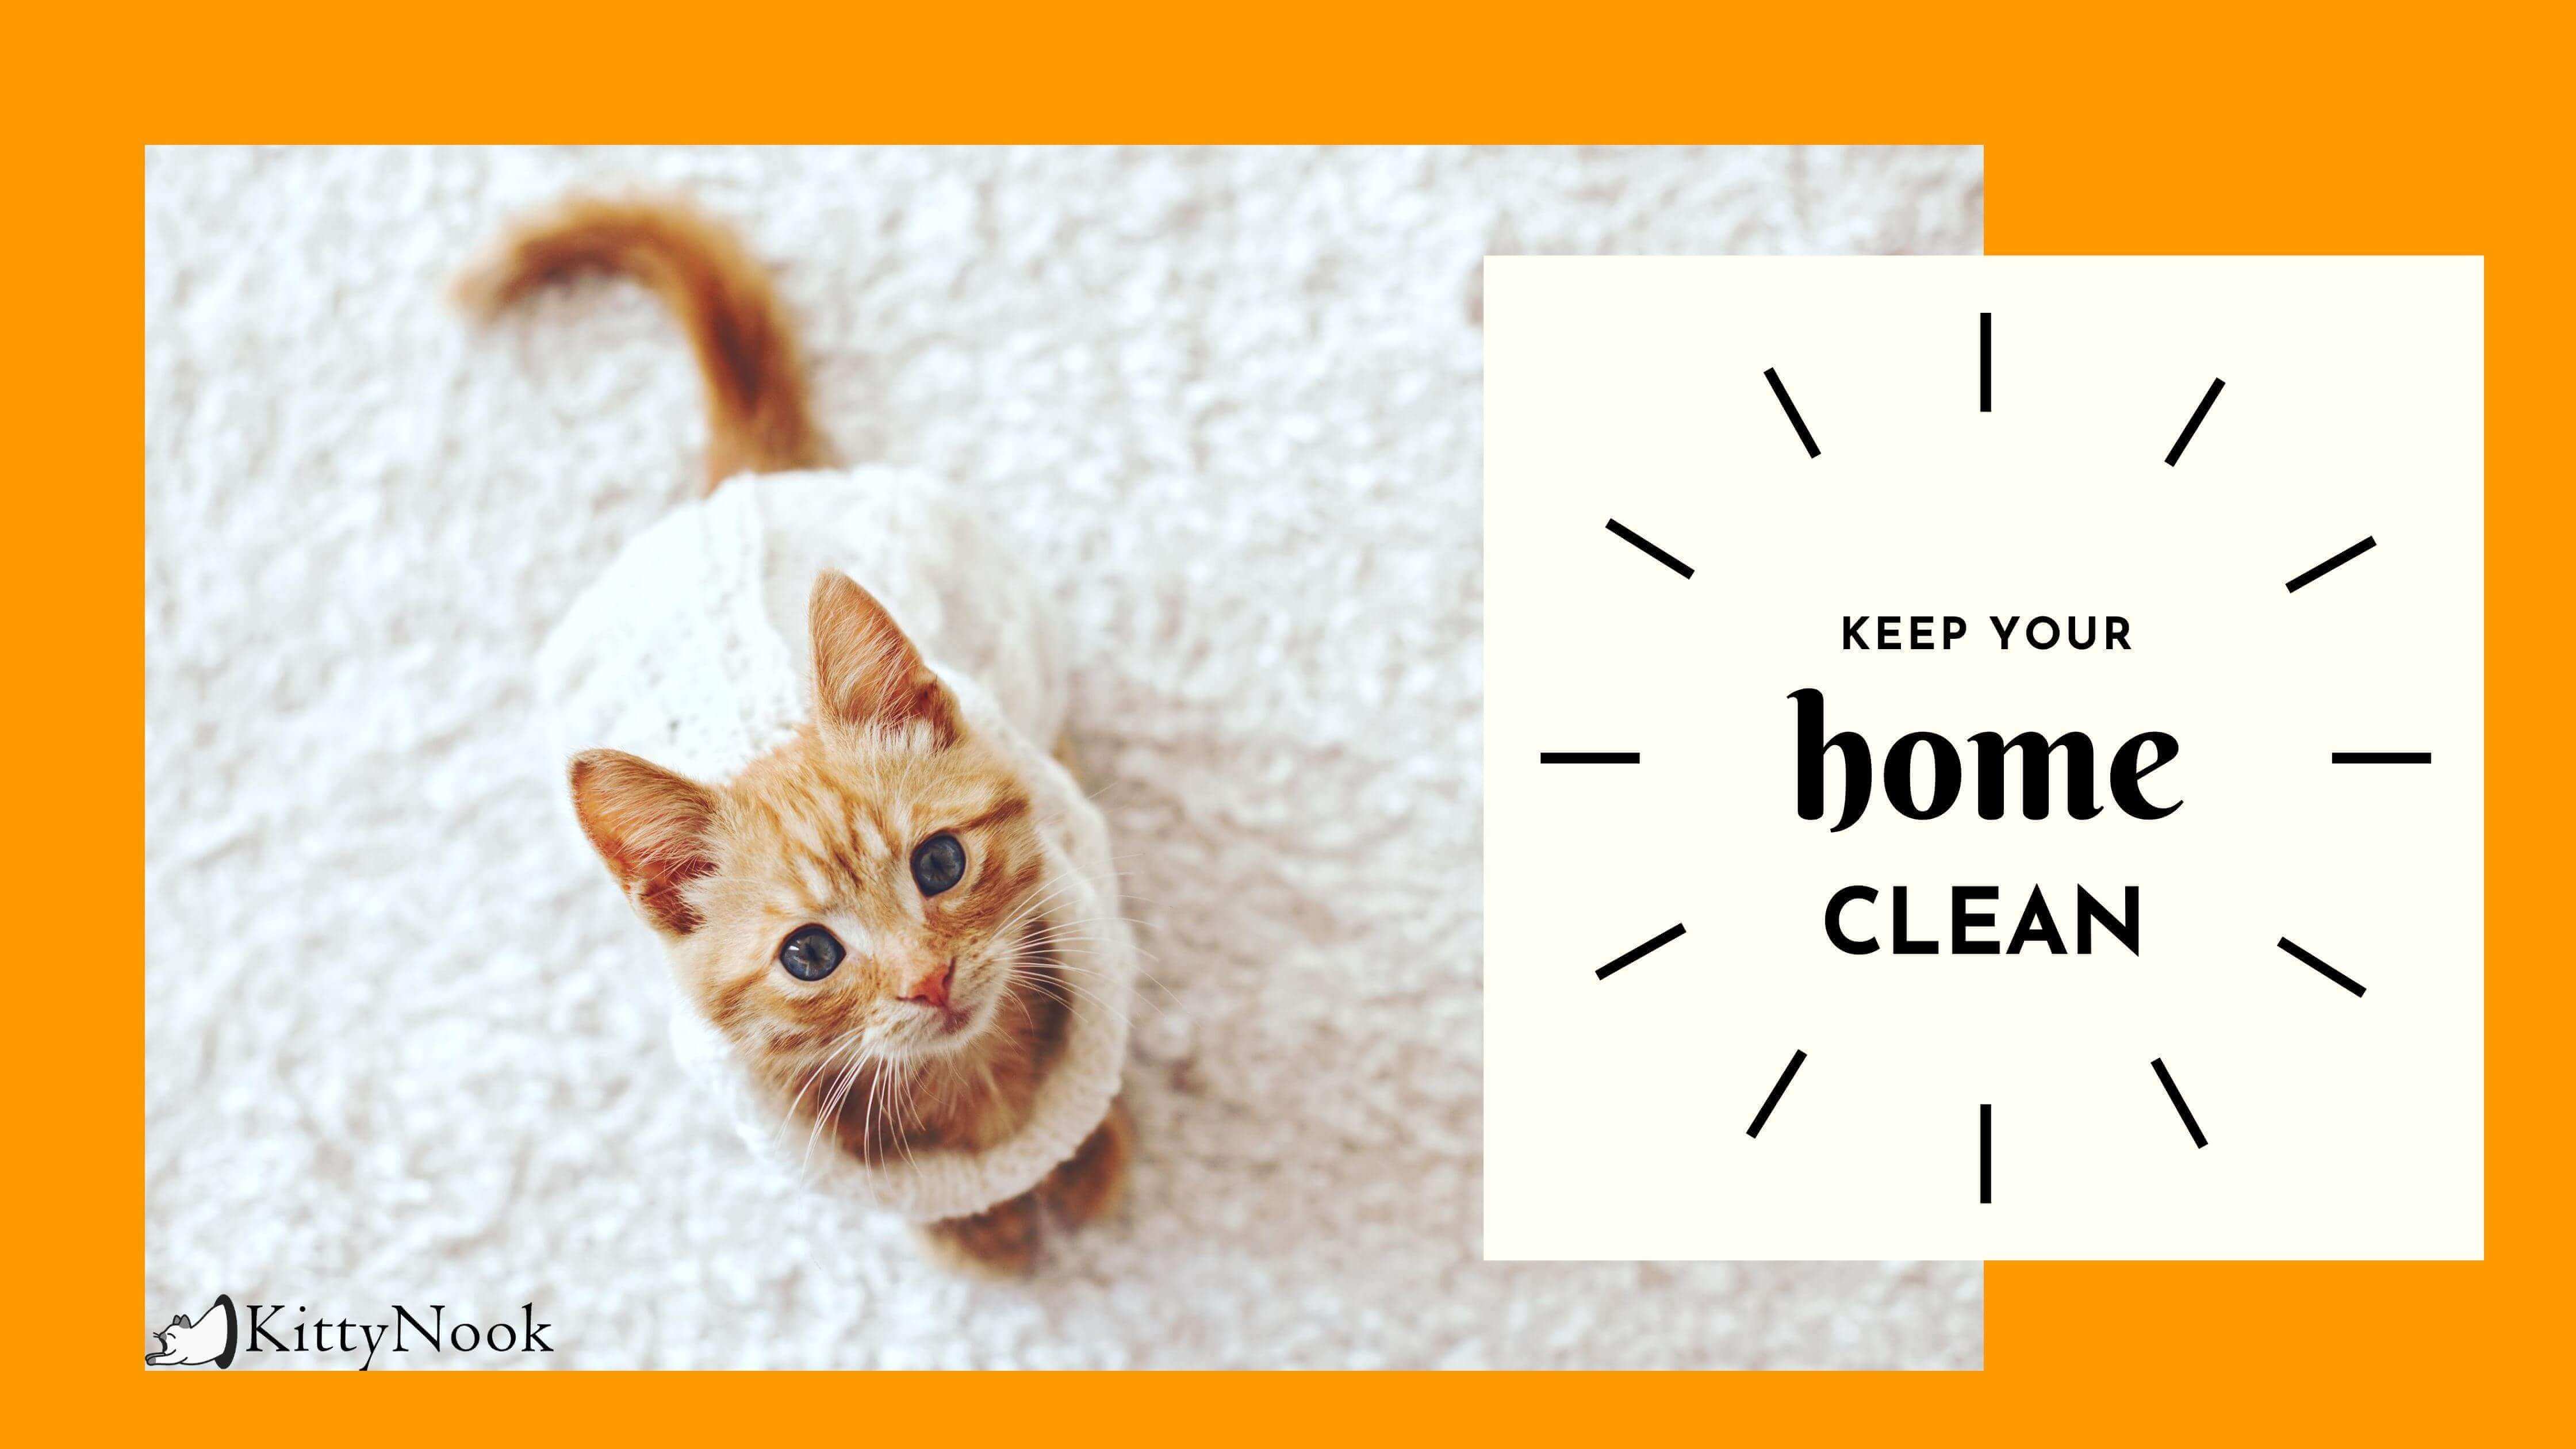 Quick Cleaning Tips for Cat Parents - KittyNook Cat Company